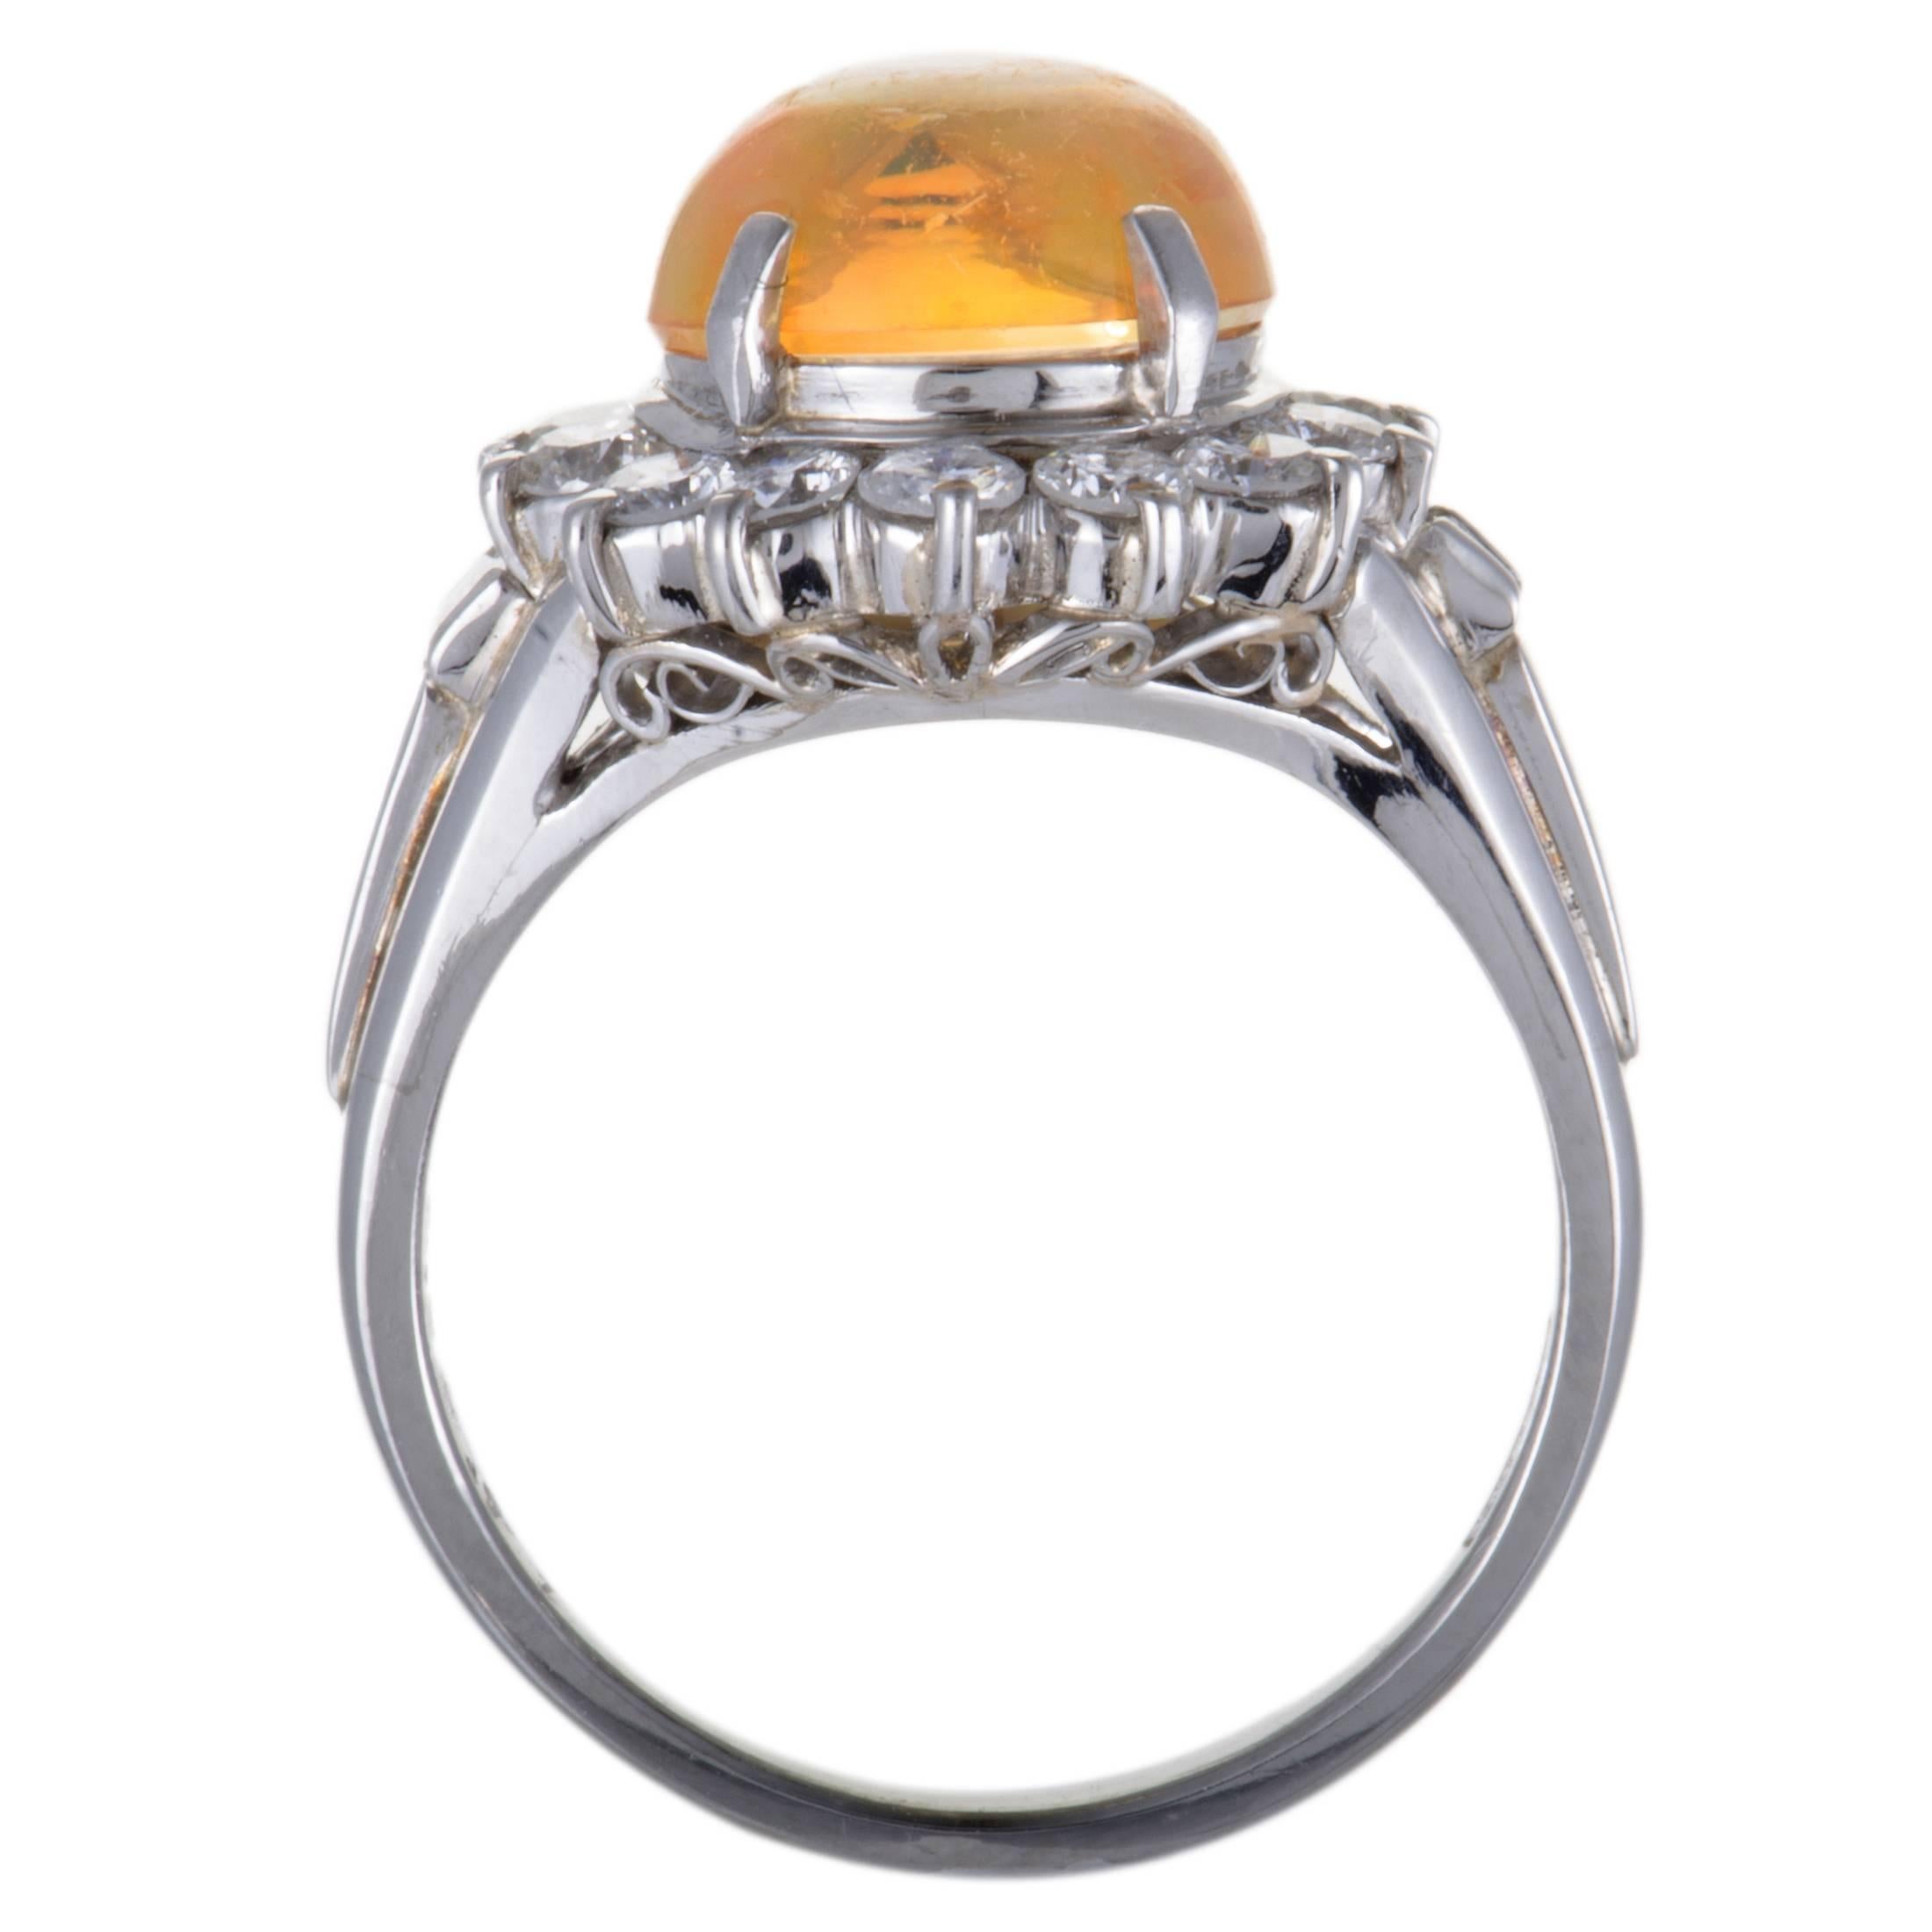 The fashionable design of this splendid ring boasts a nifty feel of prestigious elegance. The fascinating ring is made of shimmering platinum and beautifully decorated with 0.71ct of sparkling diamonds and a magnificent fire opal weighing